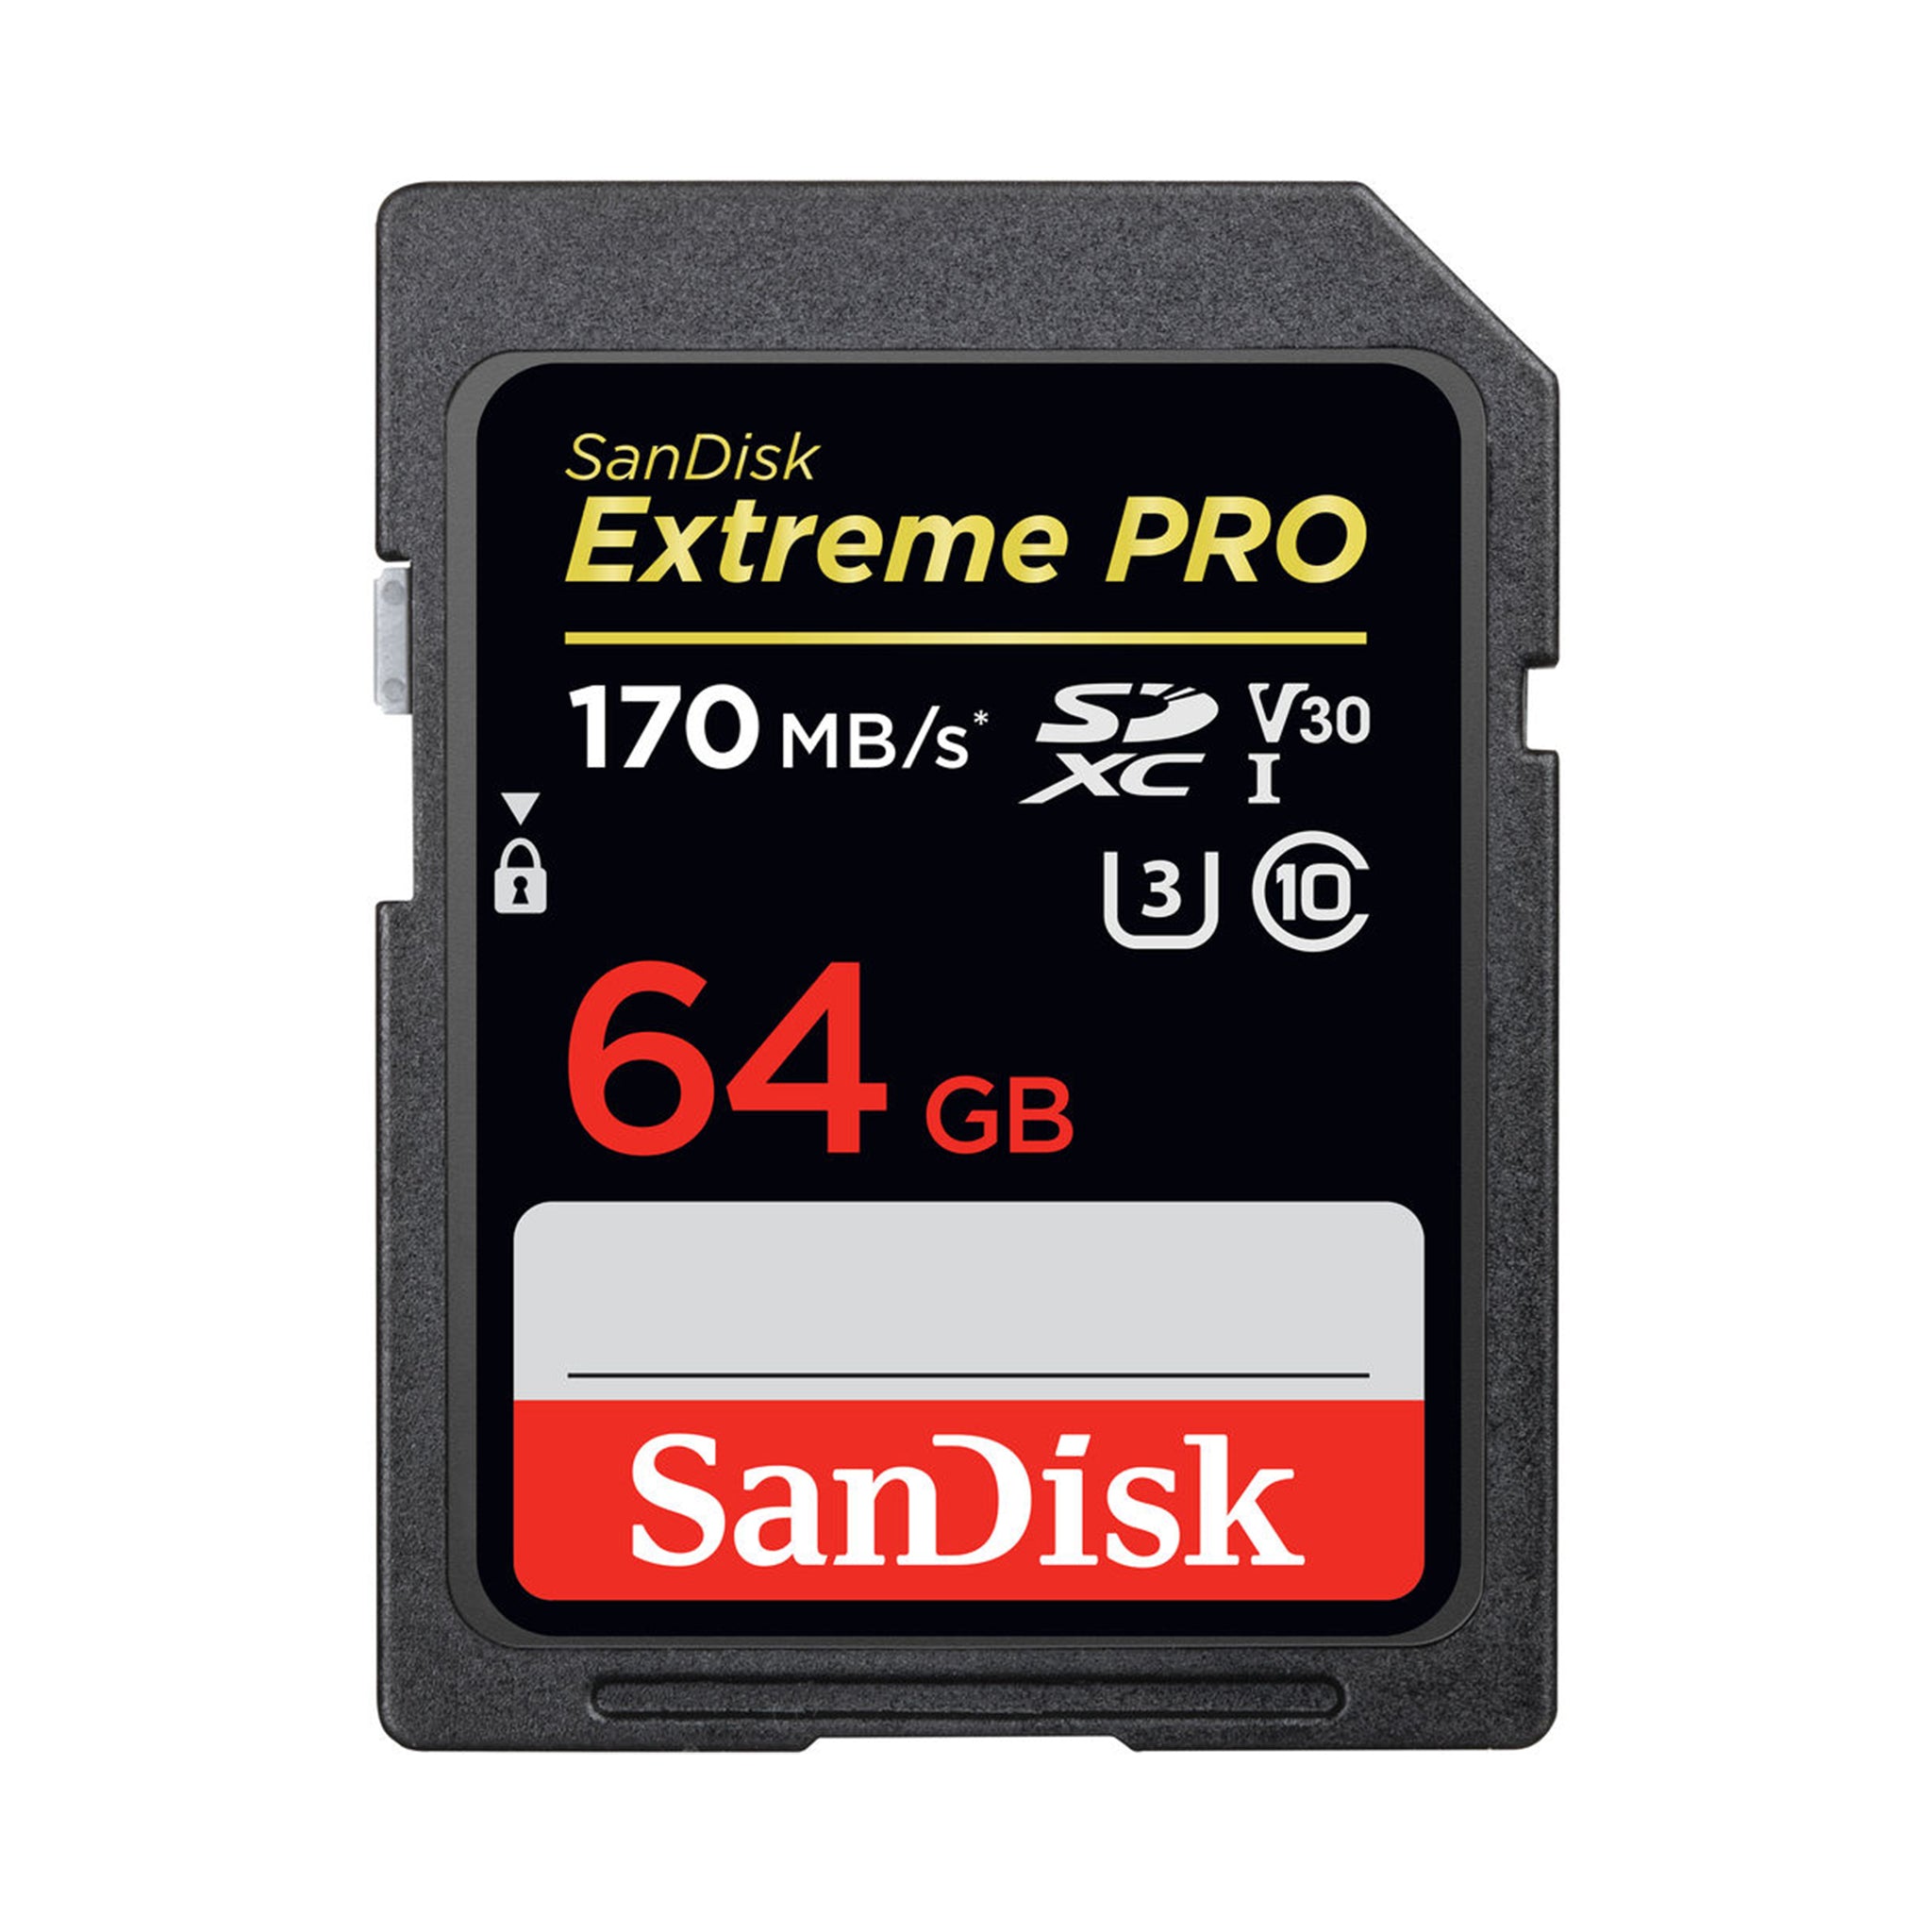 SanDisk 64GB Extreme Pro SD Card